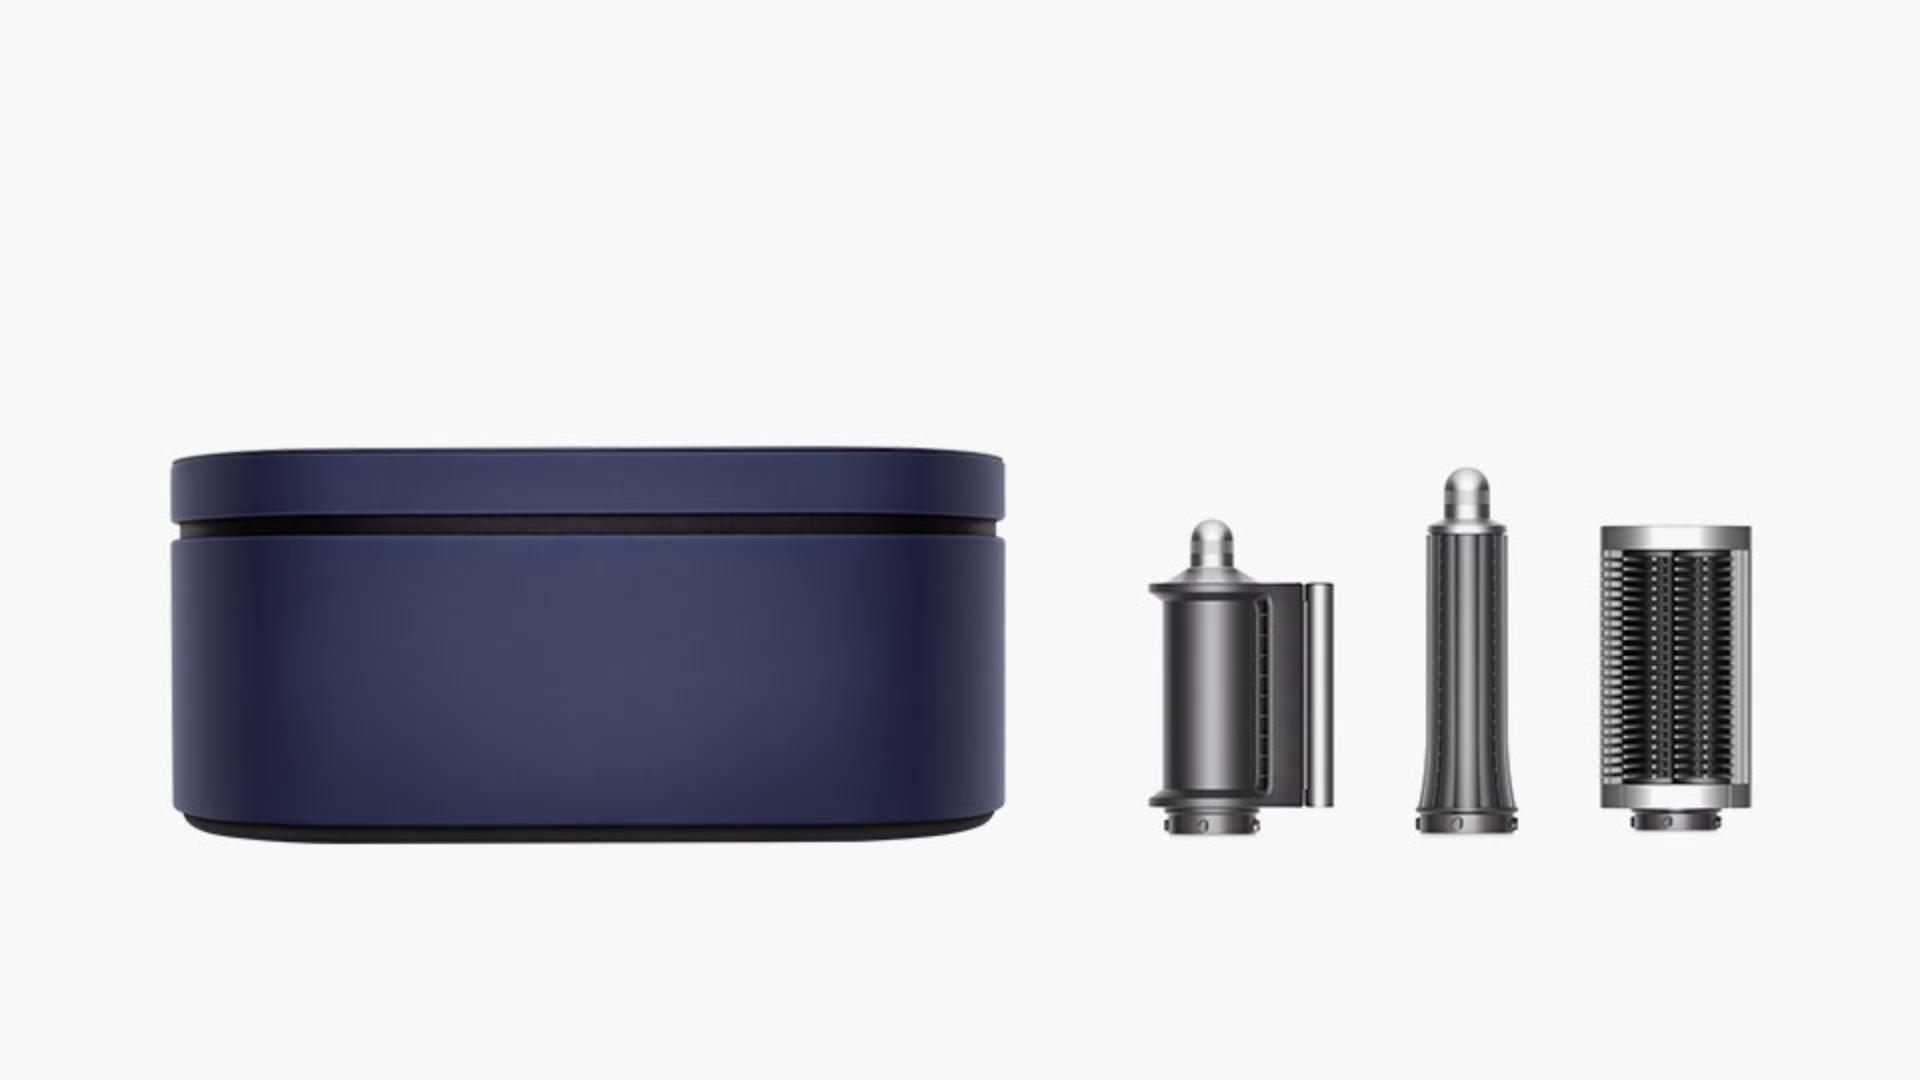 Line up of Dyson Airwrap styler attachments